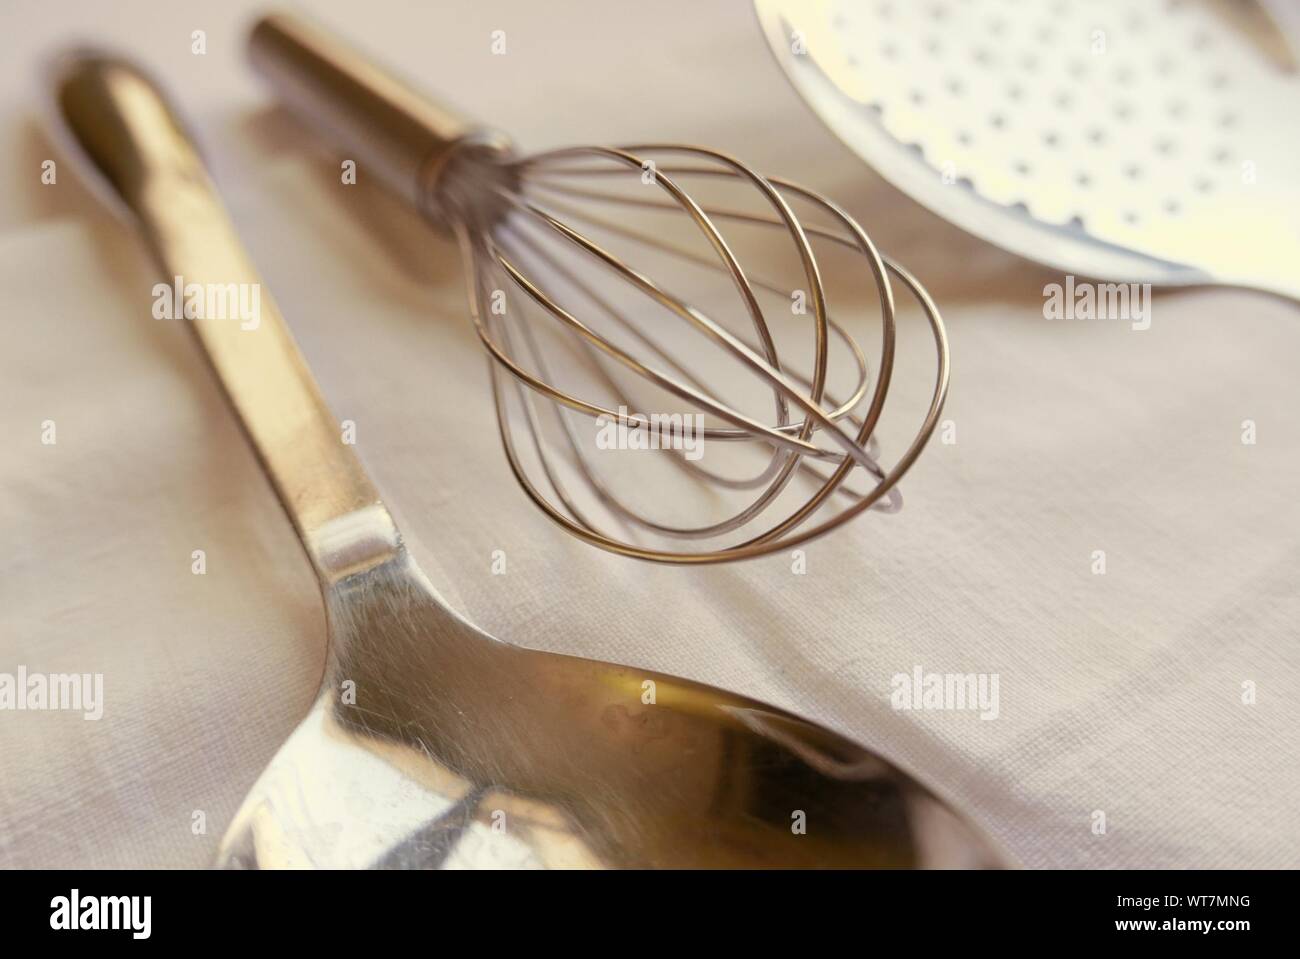 Close-up Of Cooking Utensil Stock Photo